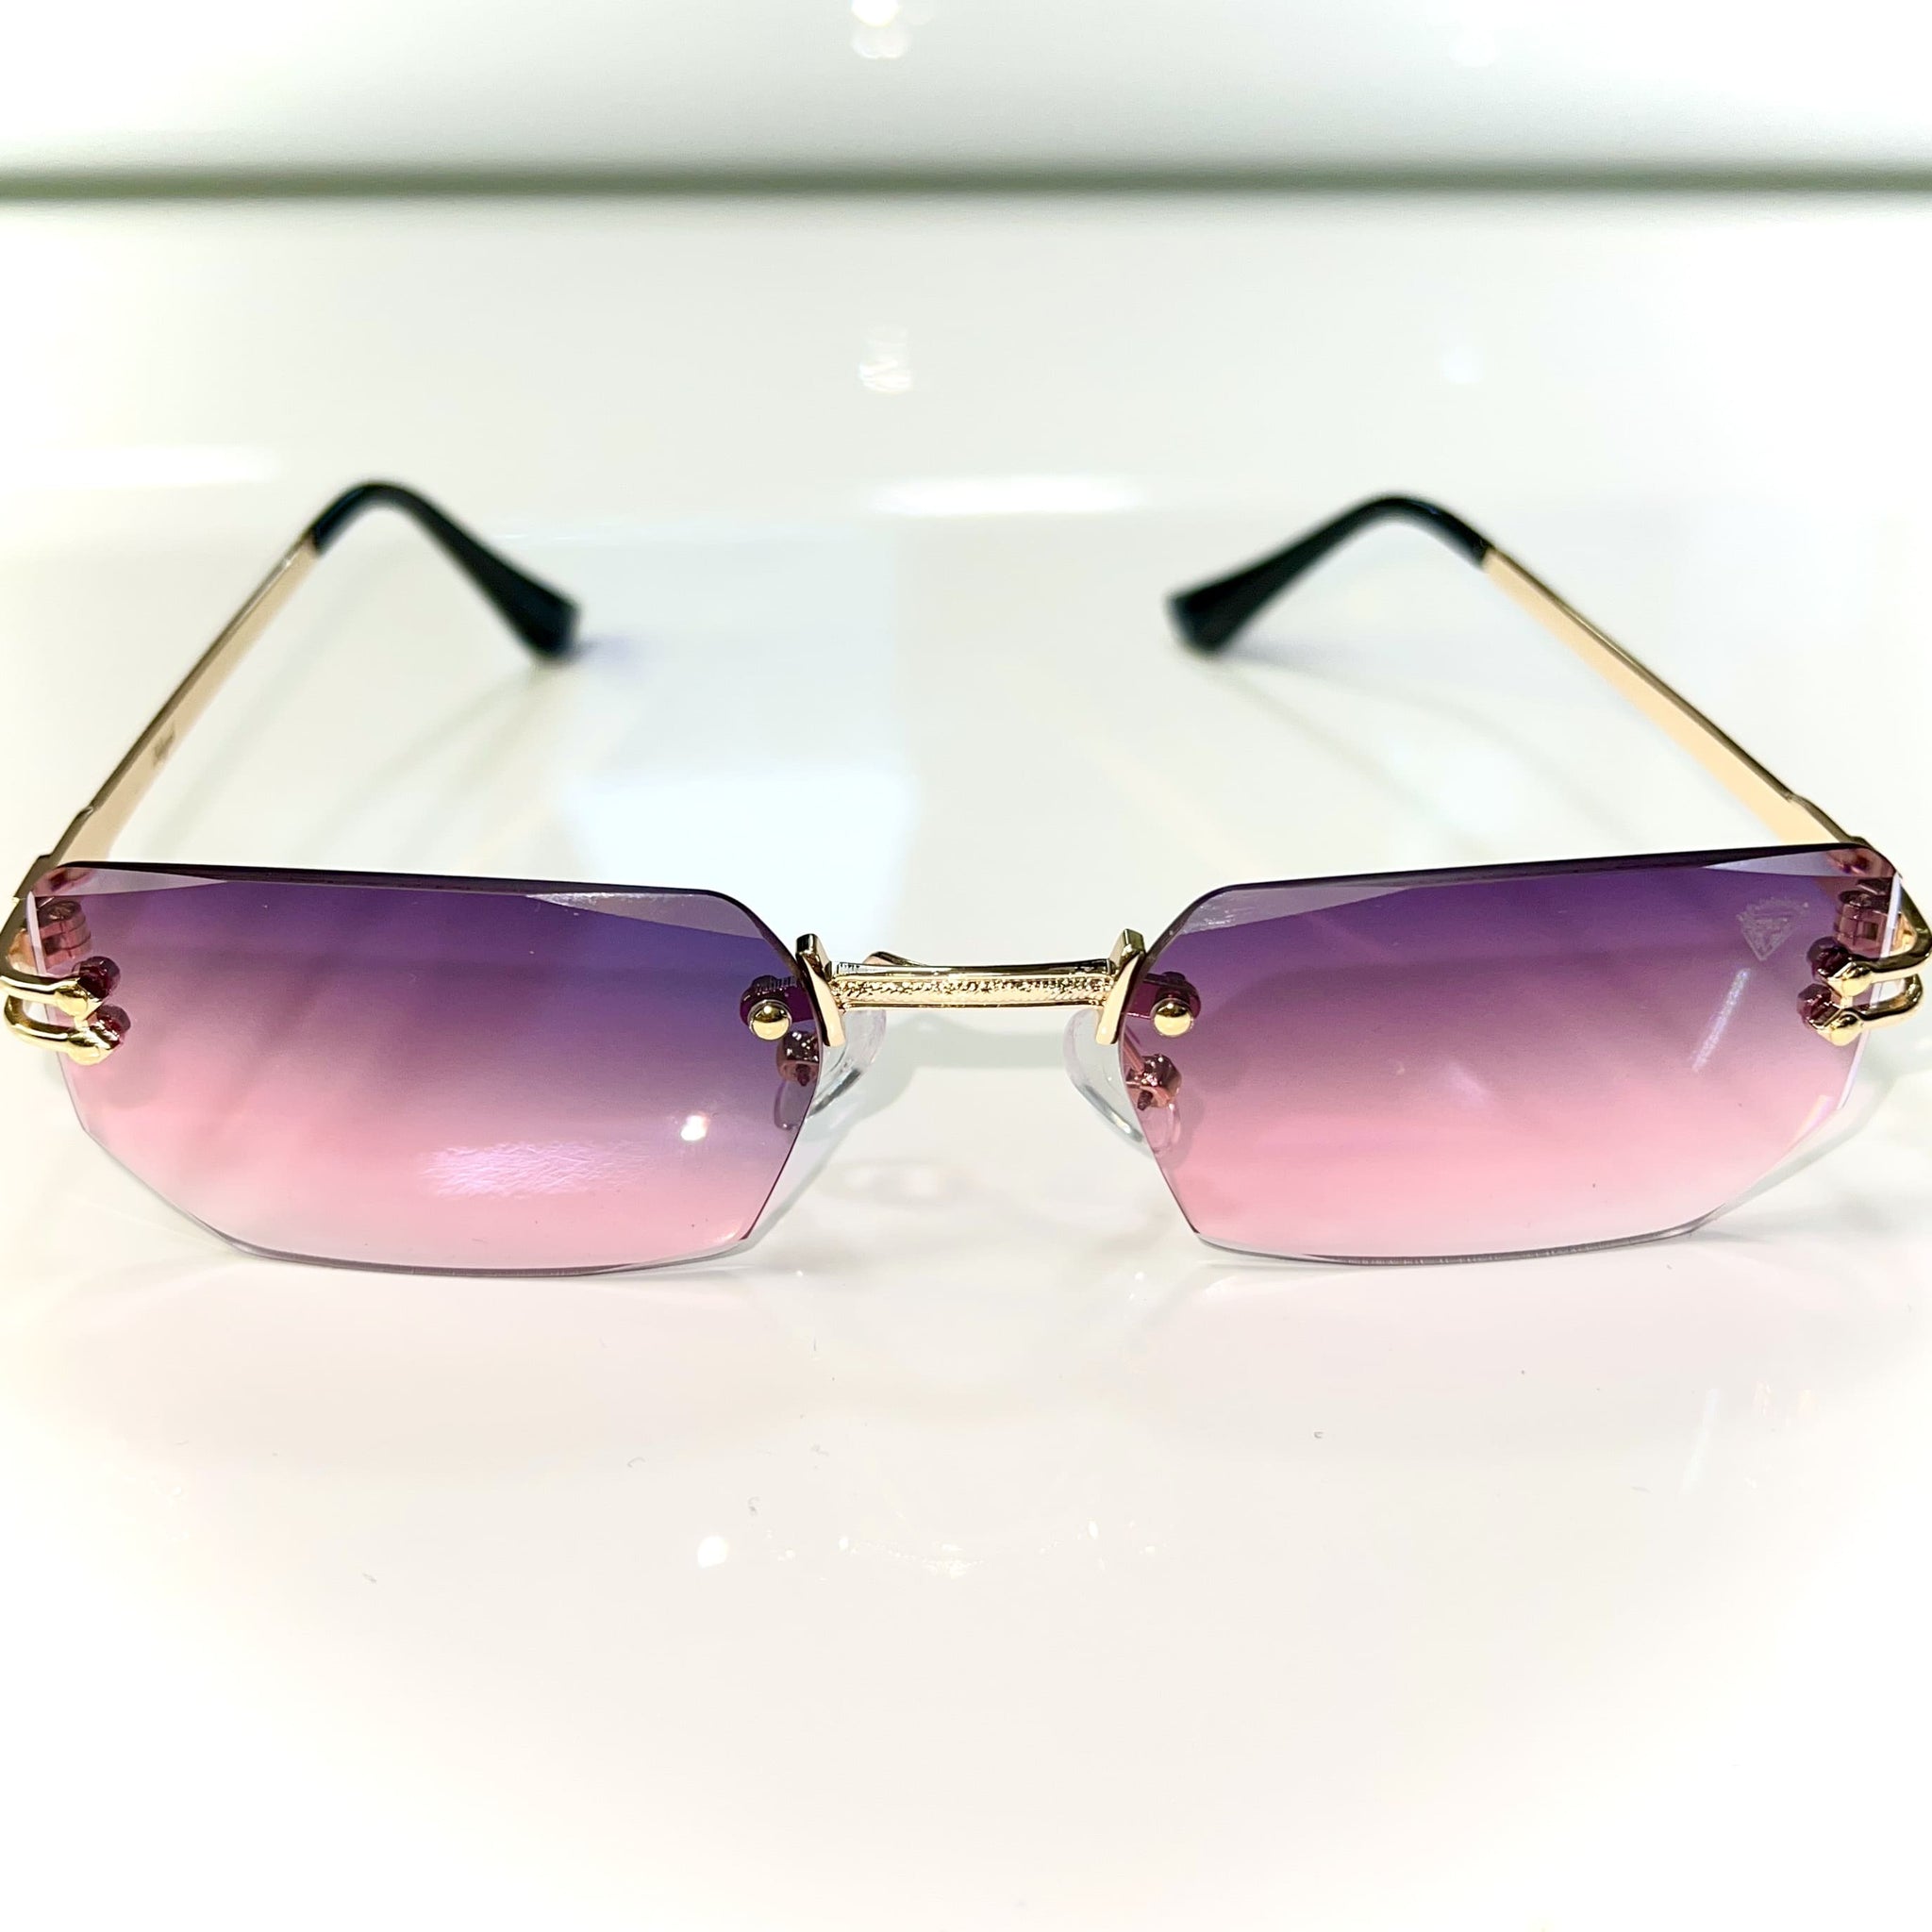 Rich Glasses - 14k gold plated - Diamond Cut - Pink / Blue Shade - Sehgal Glasses